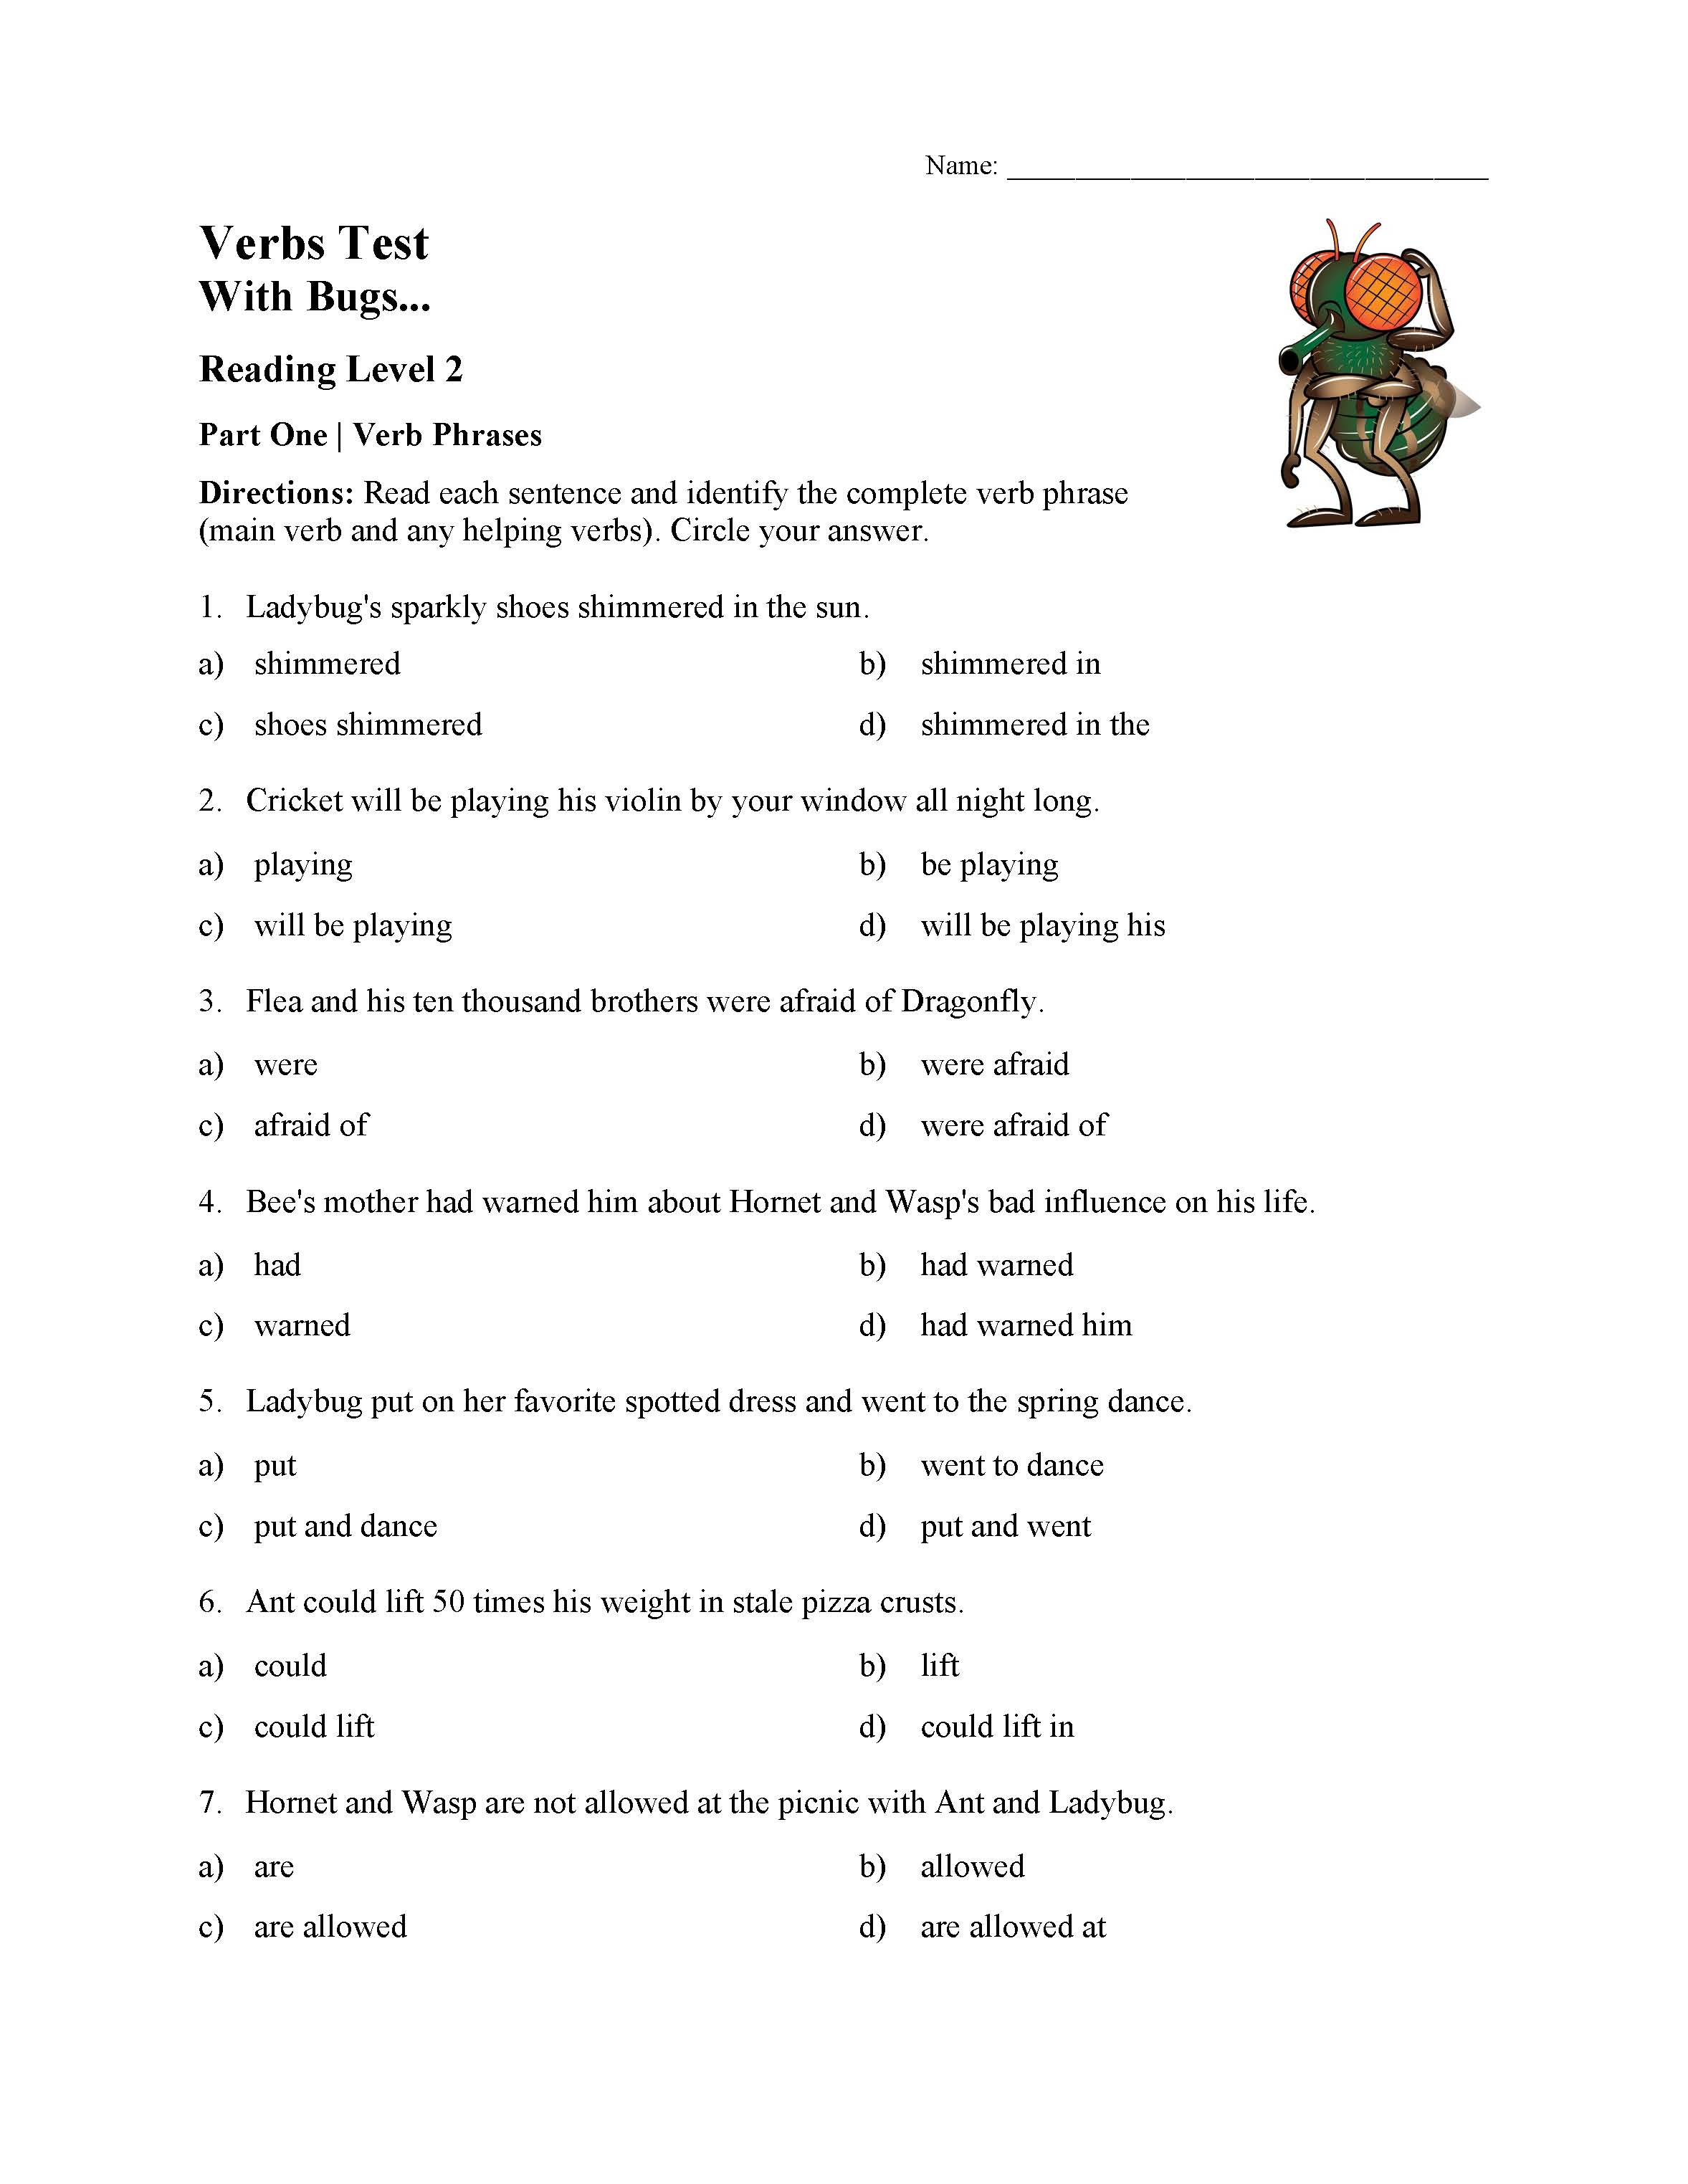 This is a preview image of the Verbs Test - With Bugs | Reading Level 2.